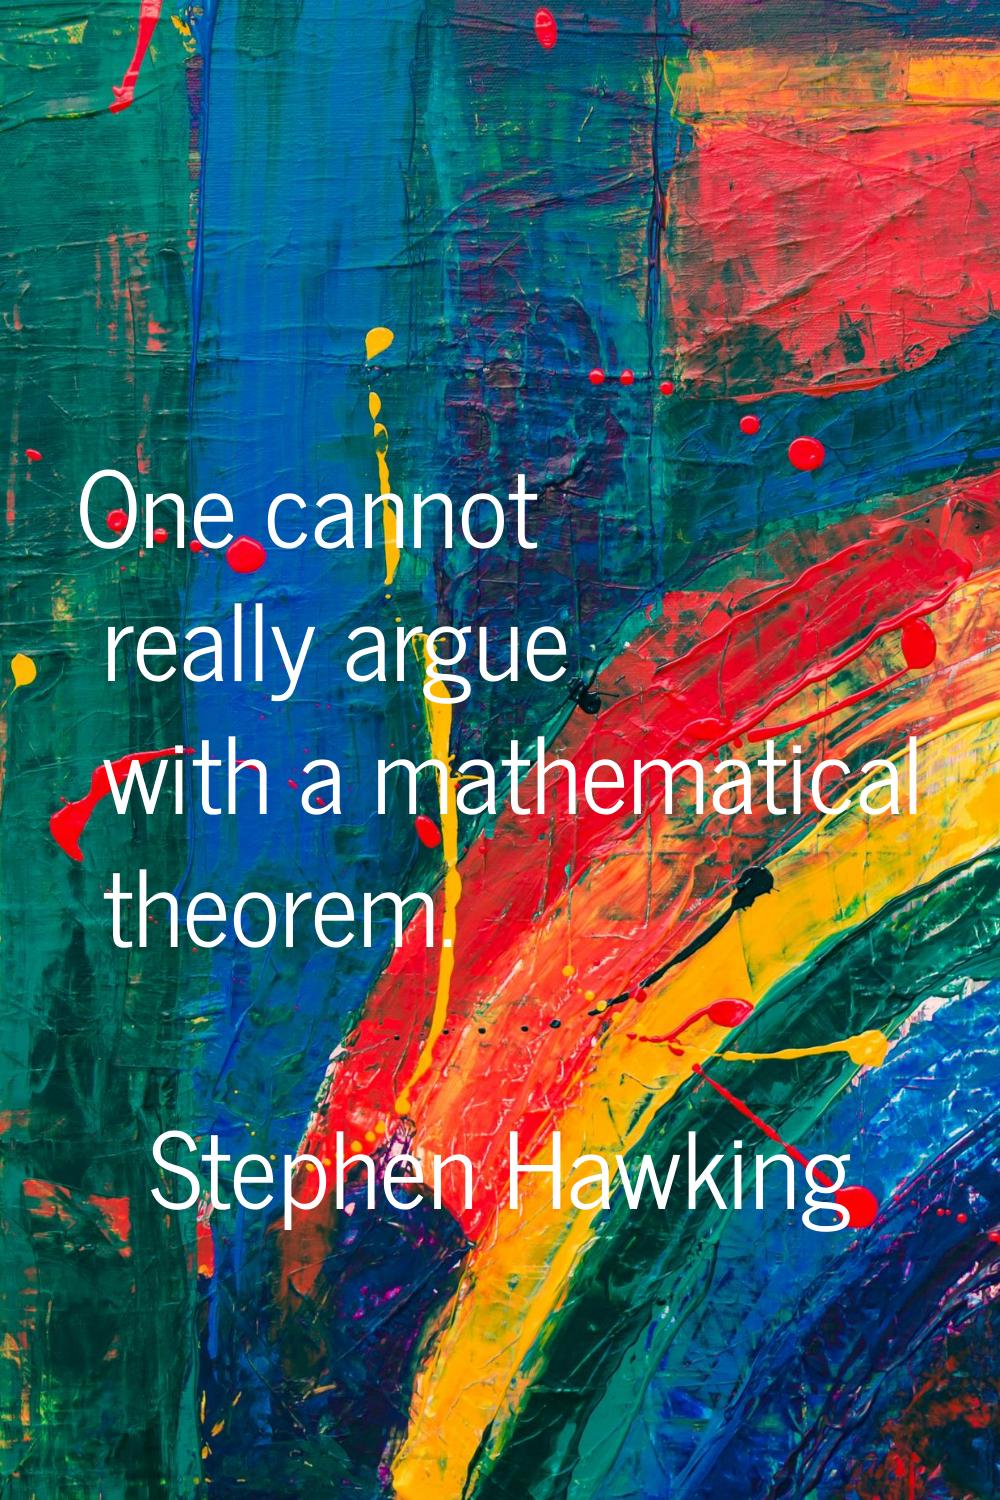 One cannot really argue with a mathematical theorem.